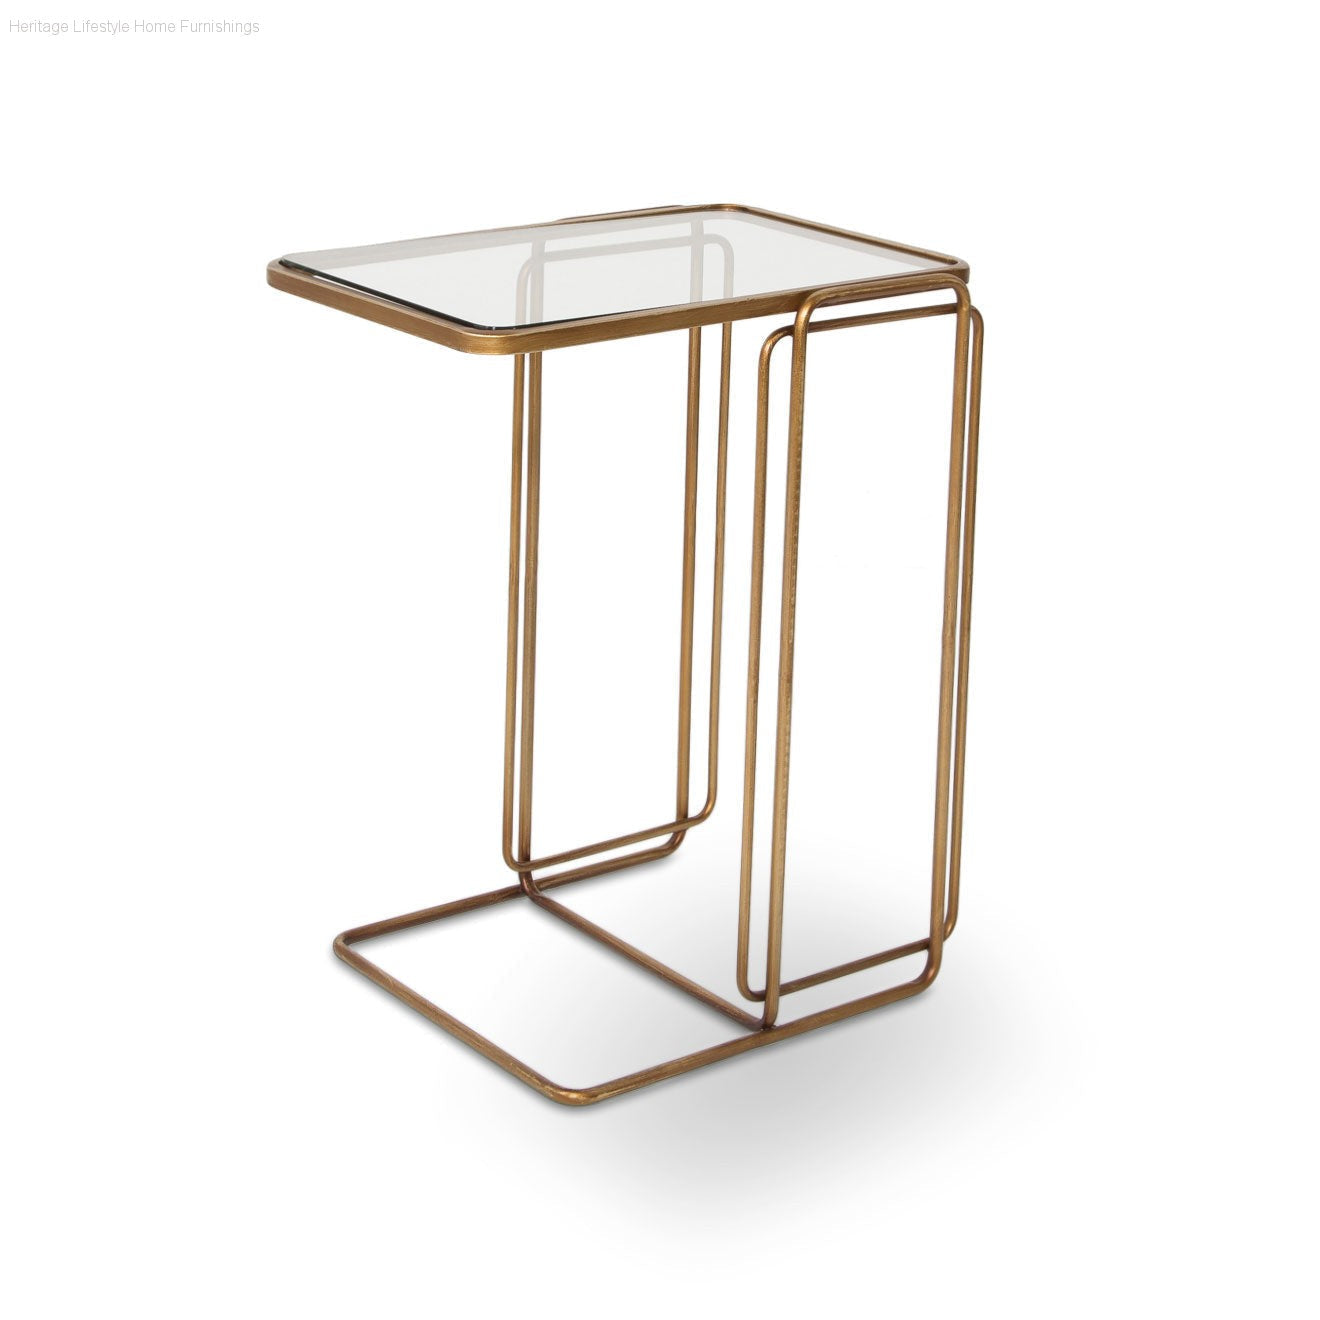 HLHF Deco Side Table - Gold Living, Occasional Furniture Store Burlington Ontario Near Me 